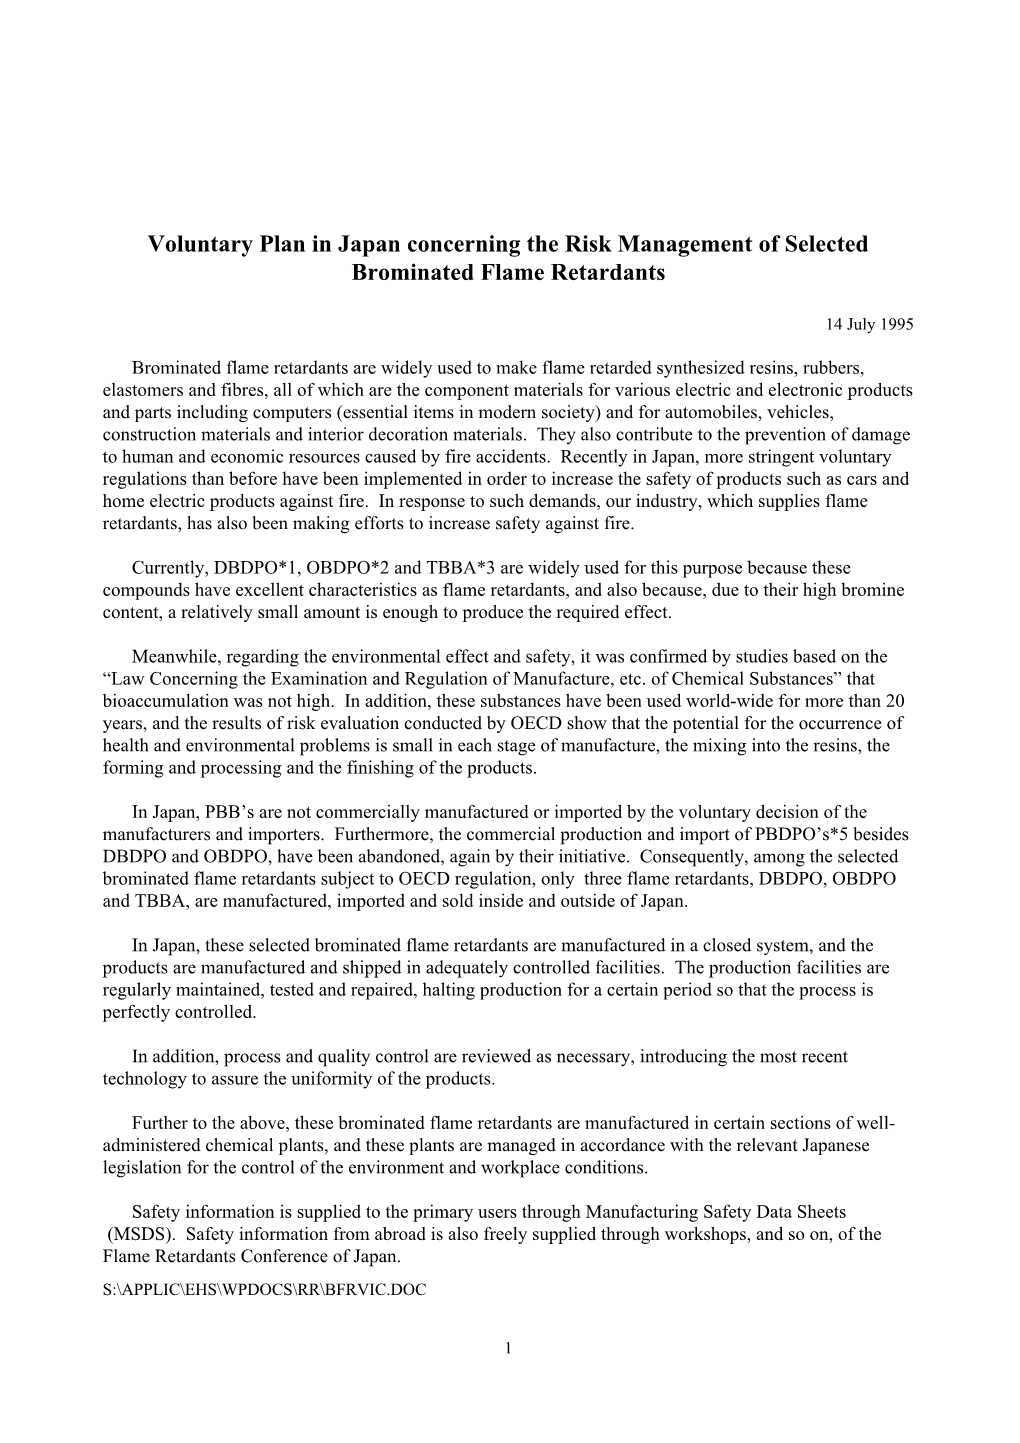 Voluntary Plan in Japan Concerning the Risk Management of Selected Brominated Flame Retardants